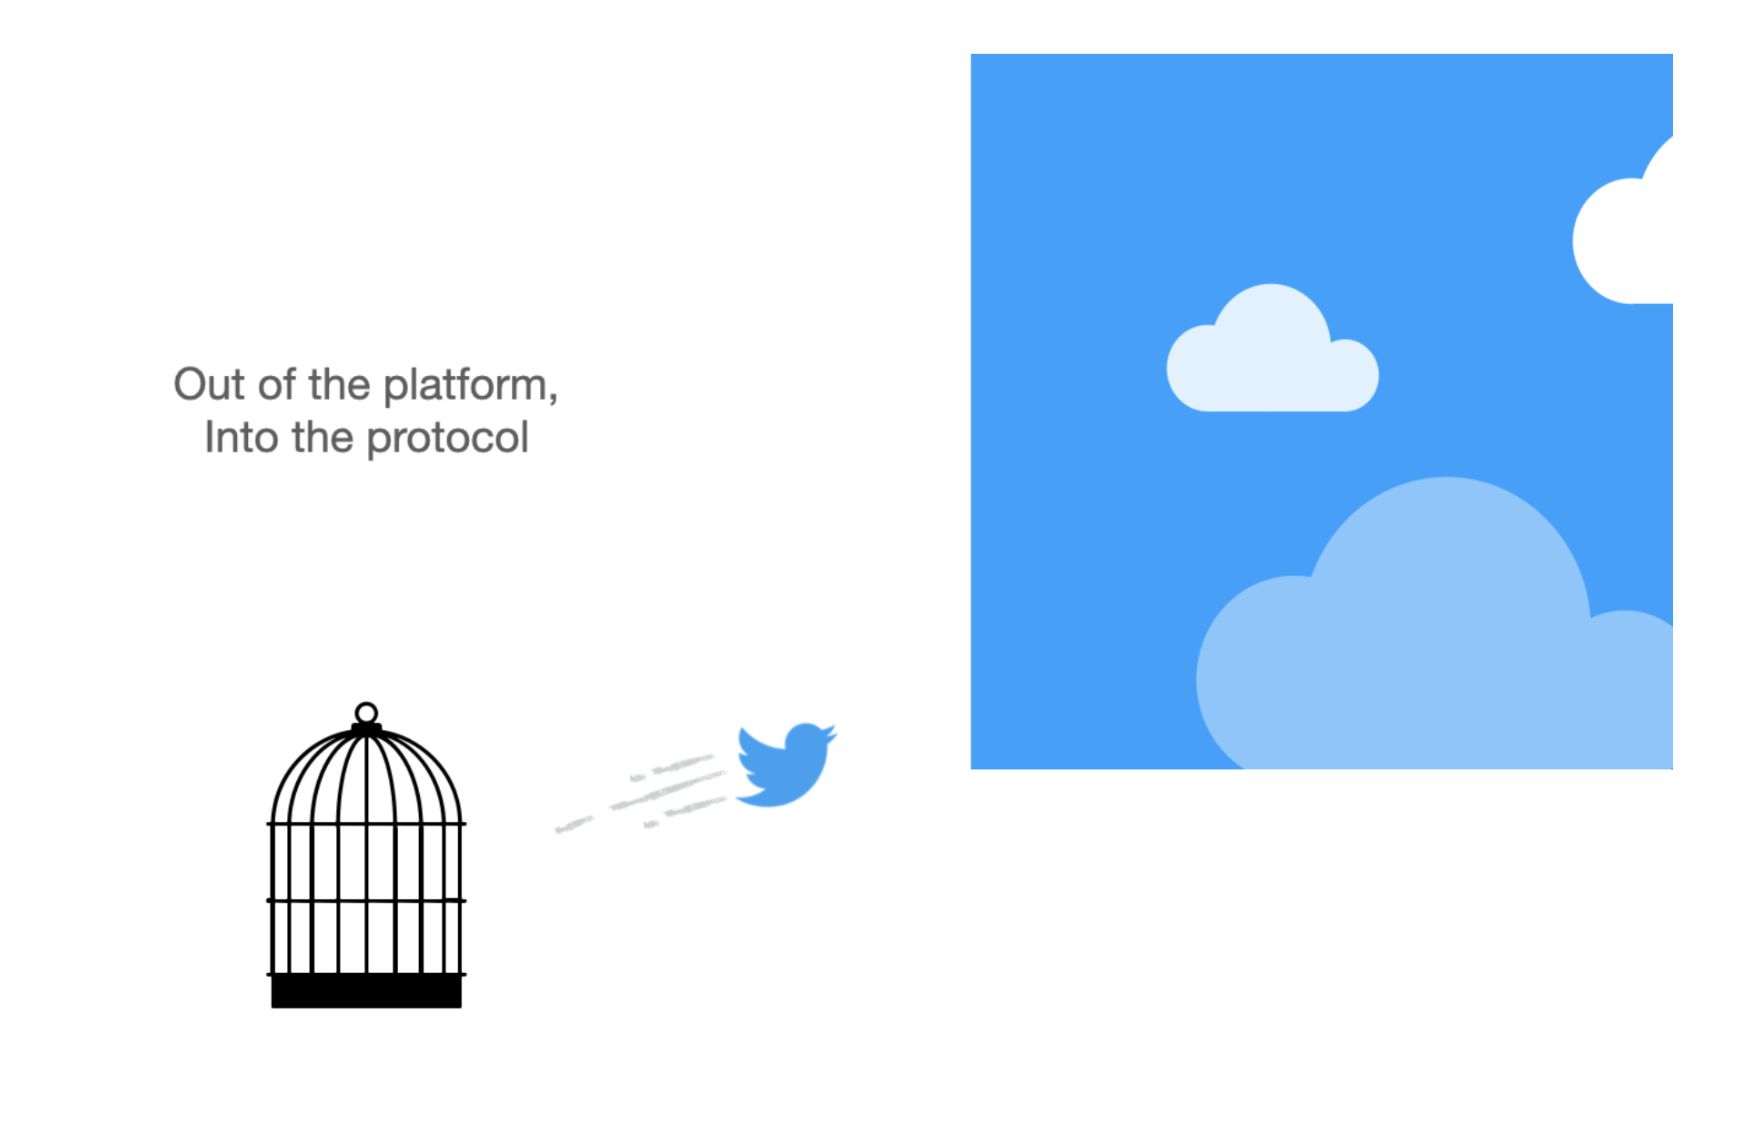 The last slide of the presentation I gave to Twitter in my proposal for how to build Bluesky.